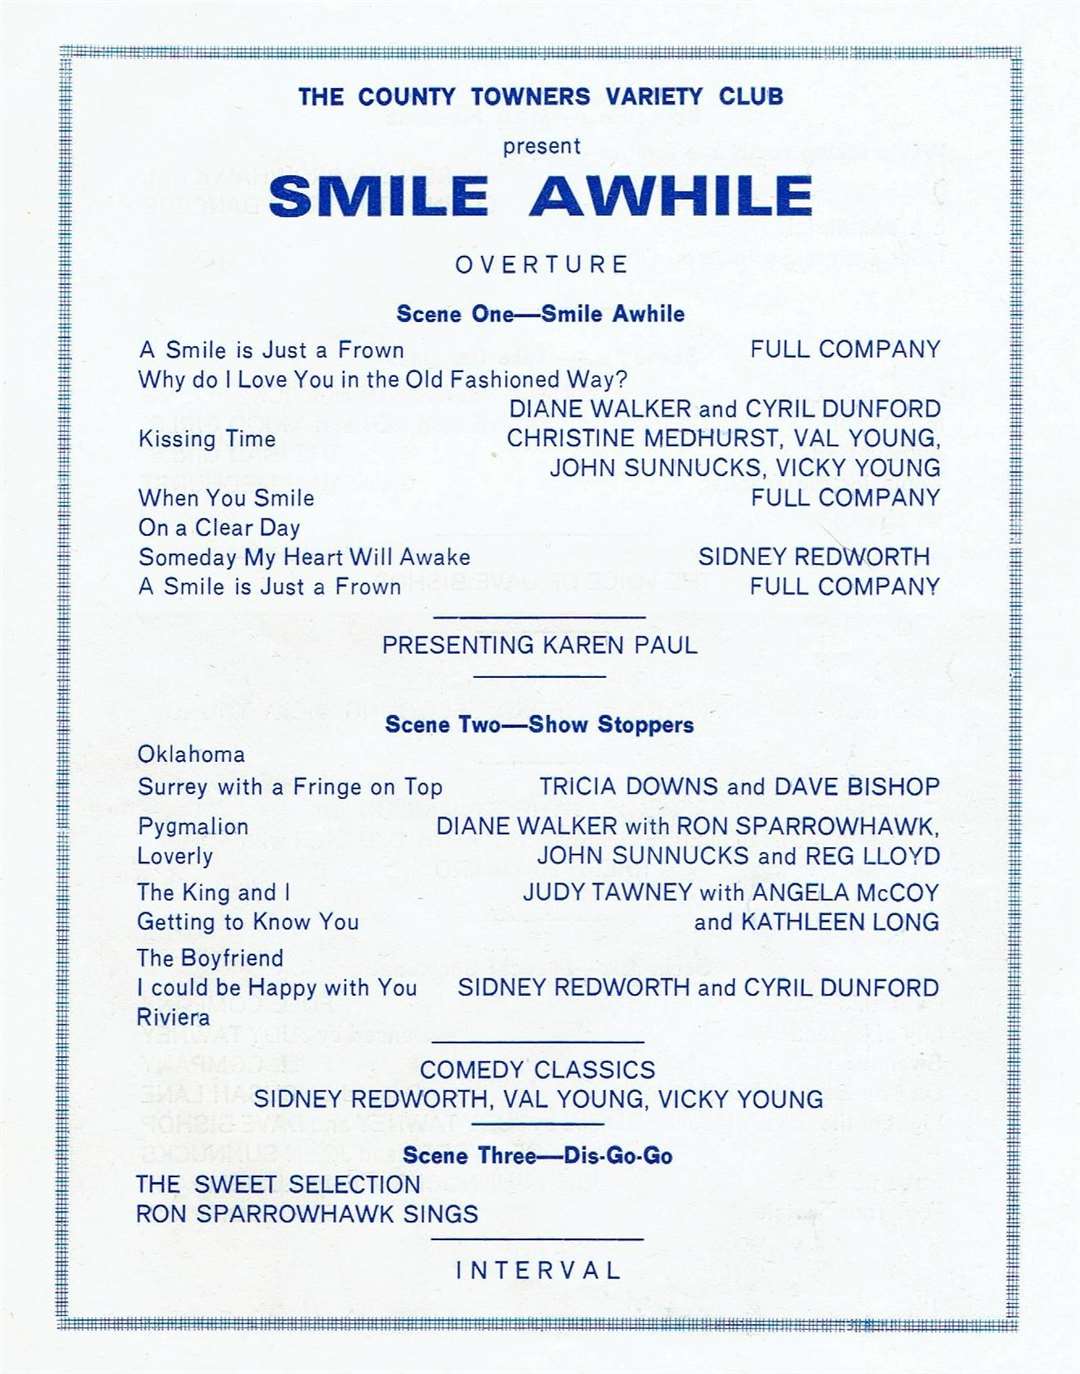 Part of the programme for one of the shows - Smile Awhile